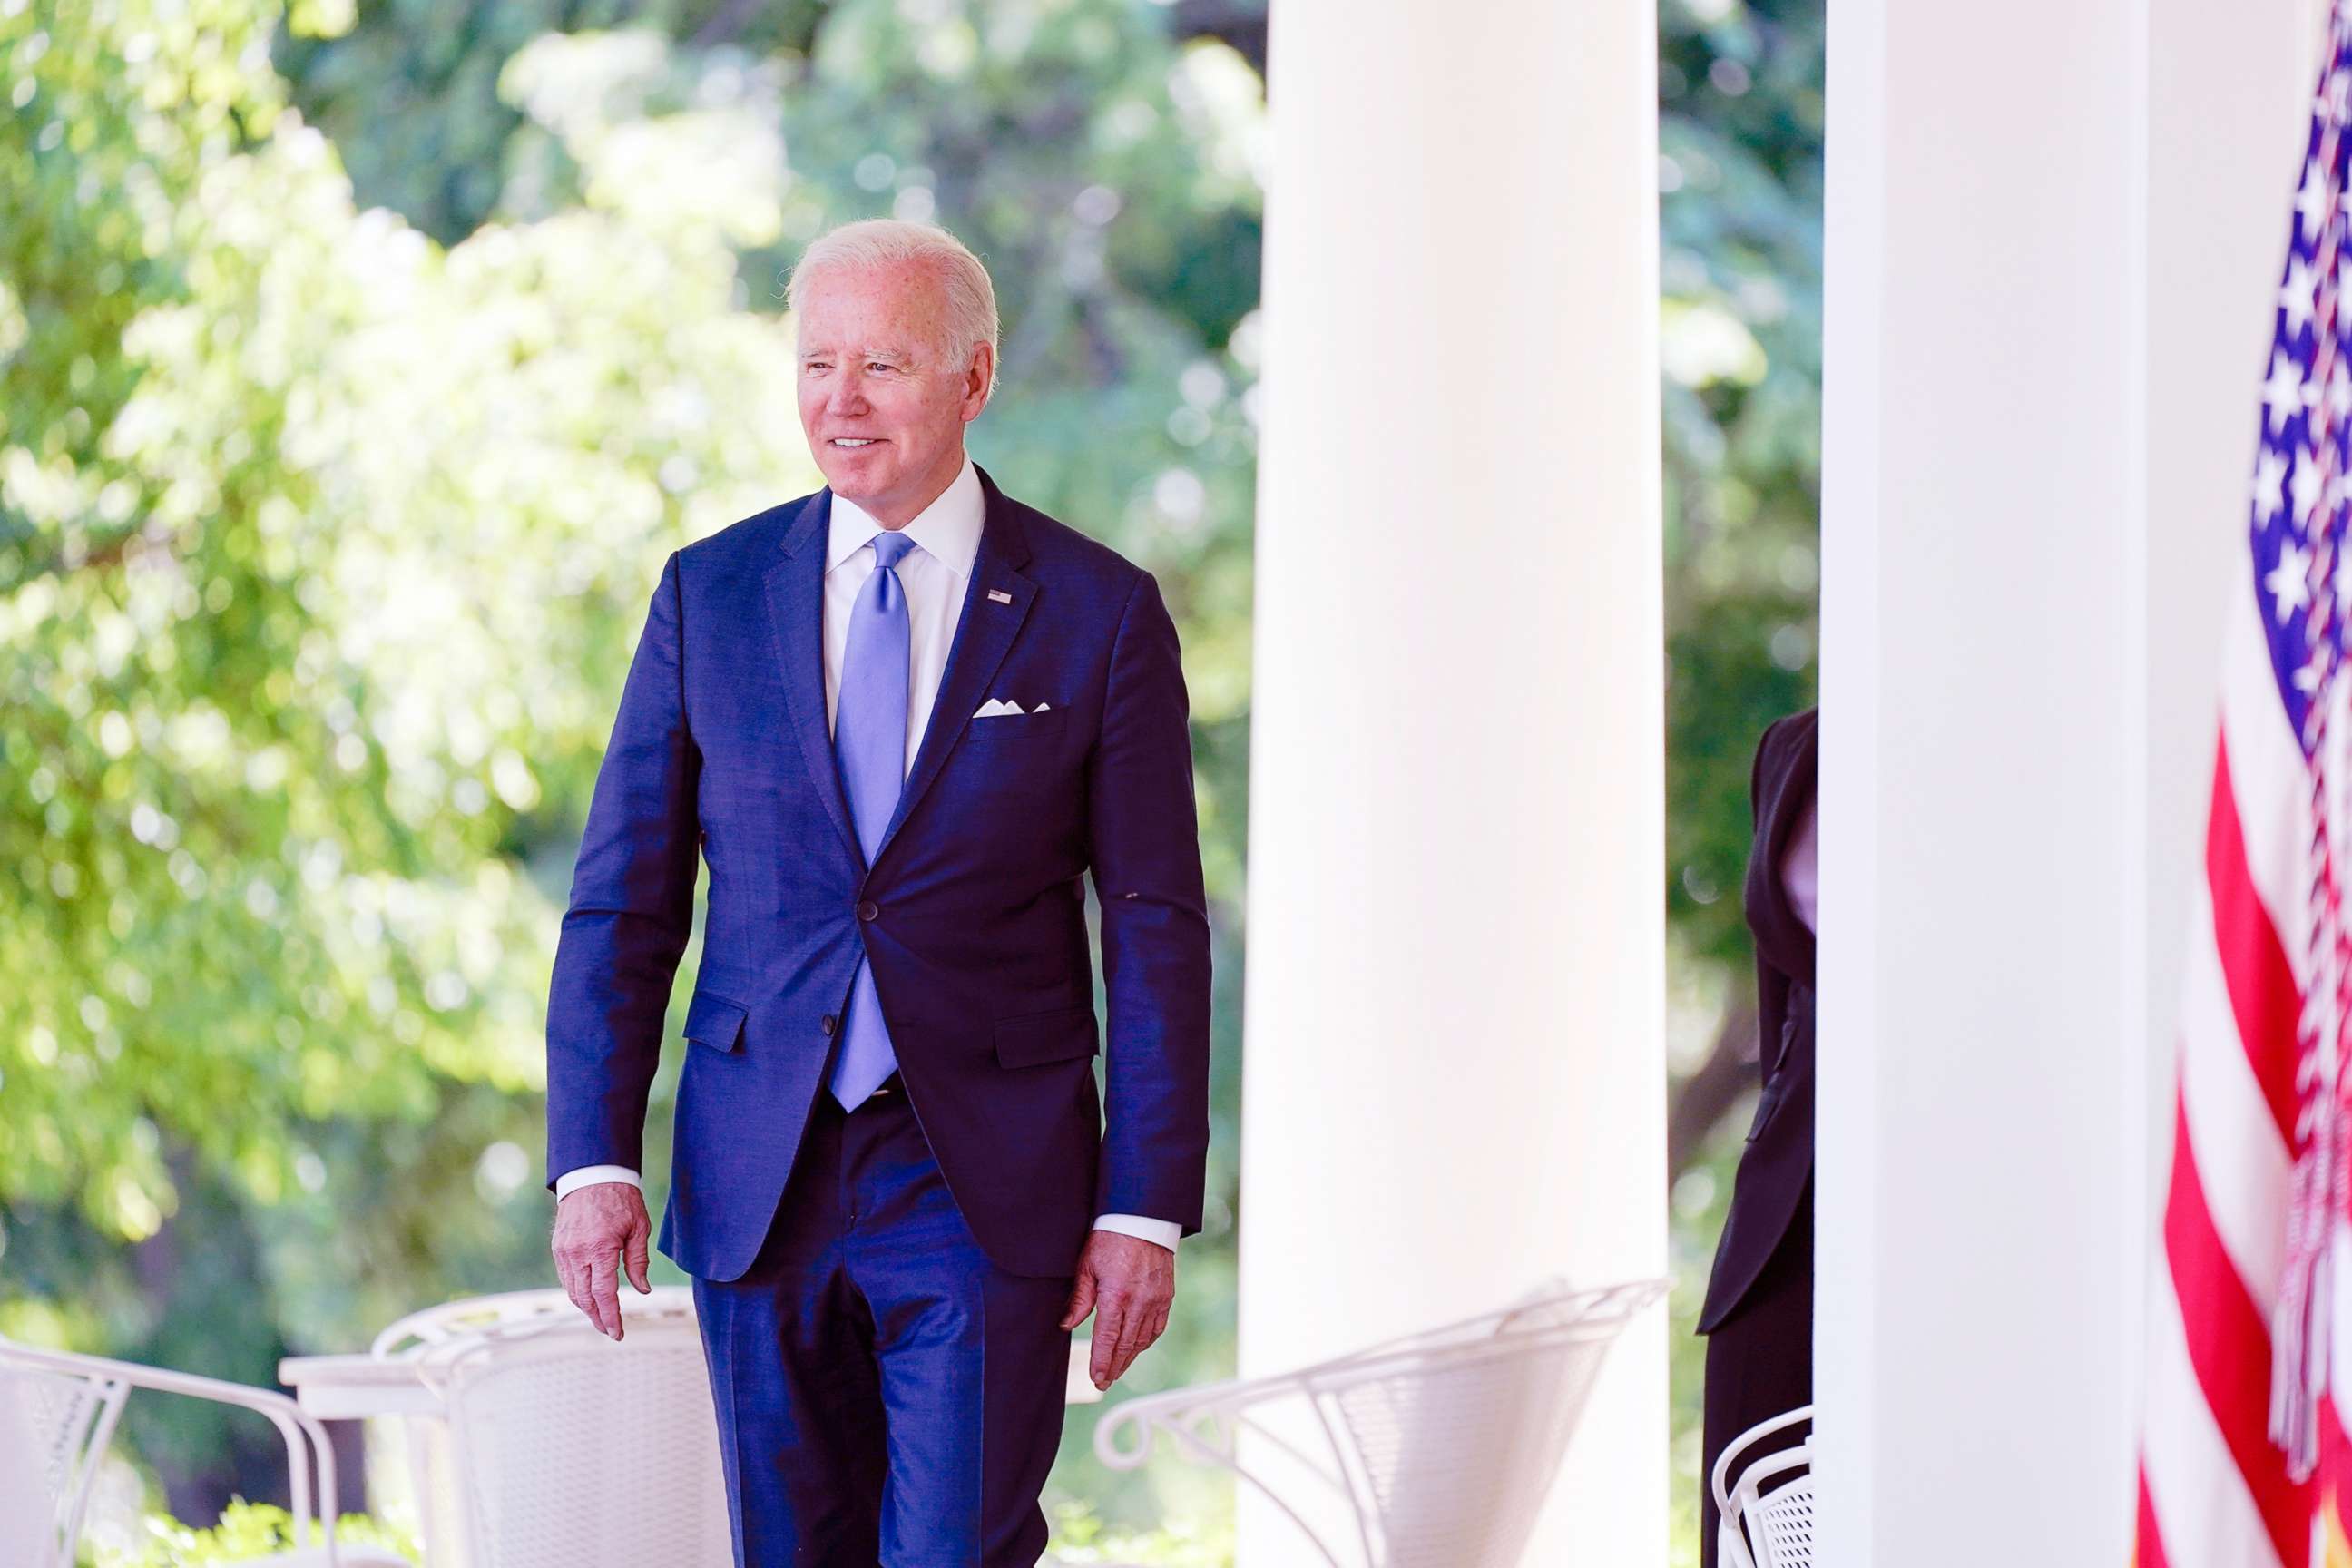 PHOTO: President Joe Biden arrives speak at an event on lowering the cost of high-speed internet in the Rose Garden of the White House, May 9, 2022, in Washington.